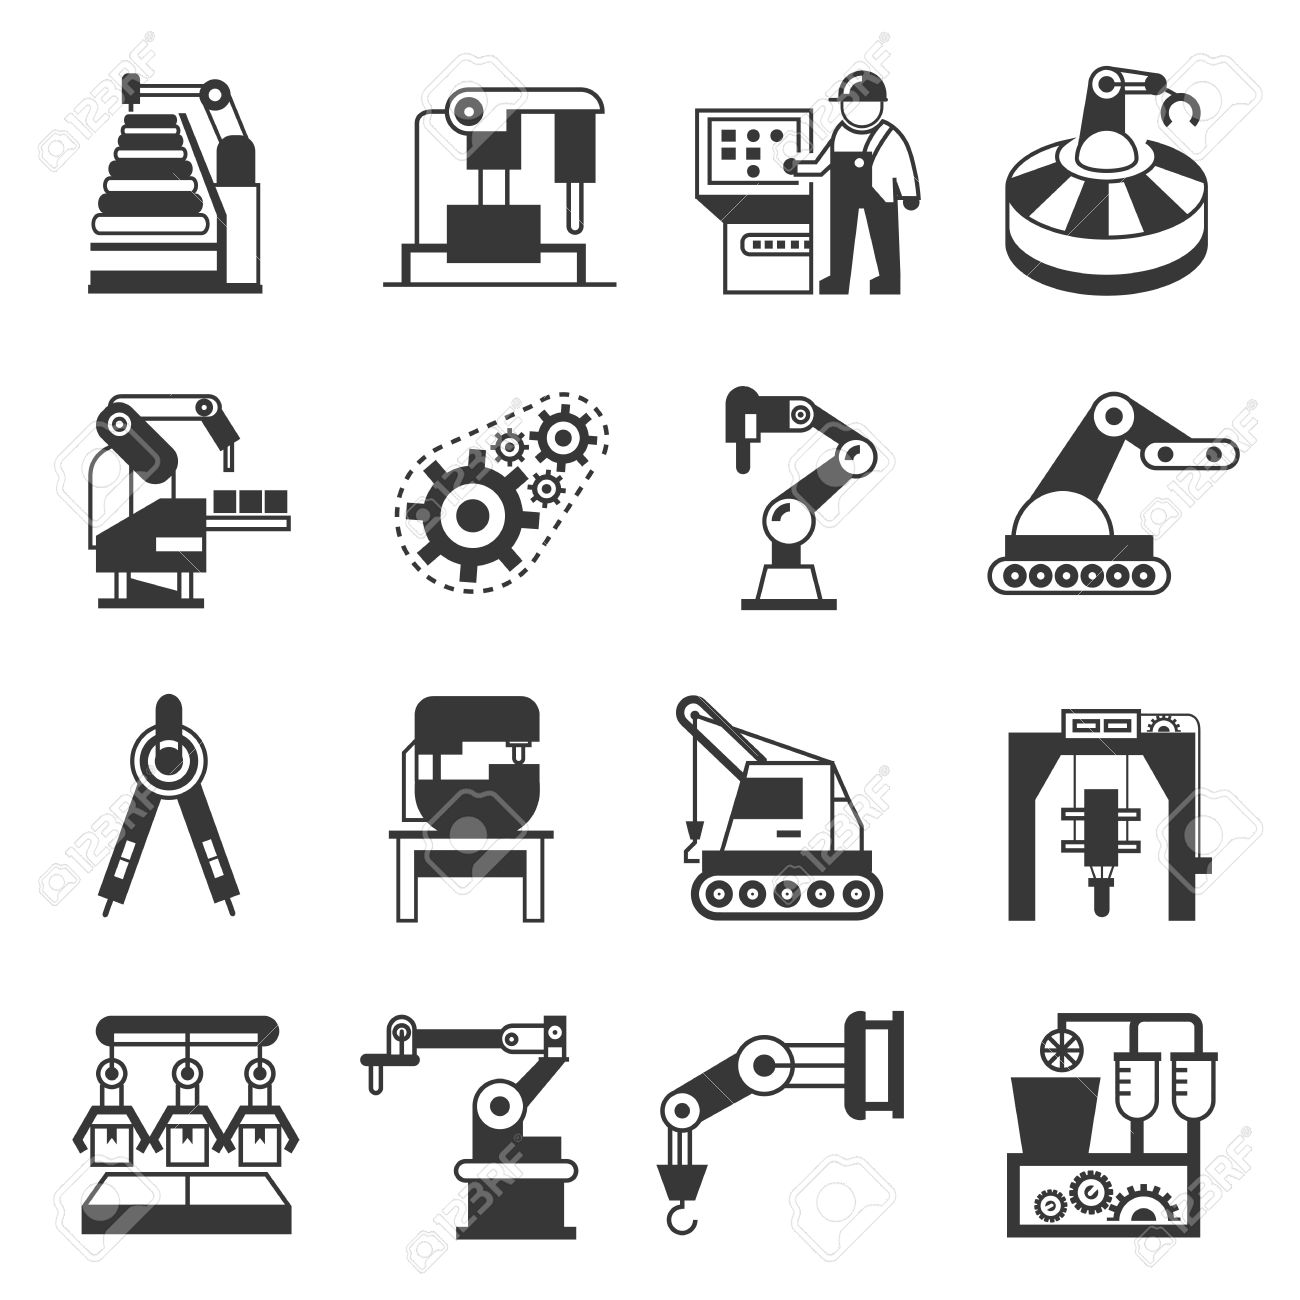 Chinese manufacturing icon Royalty Free Vector Image